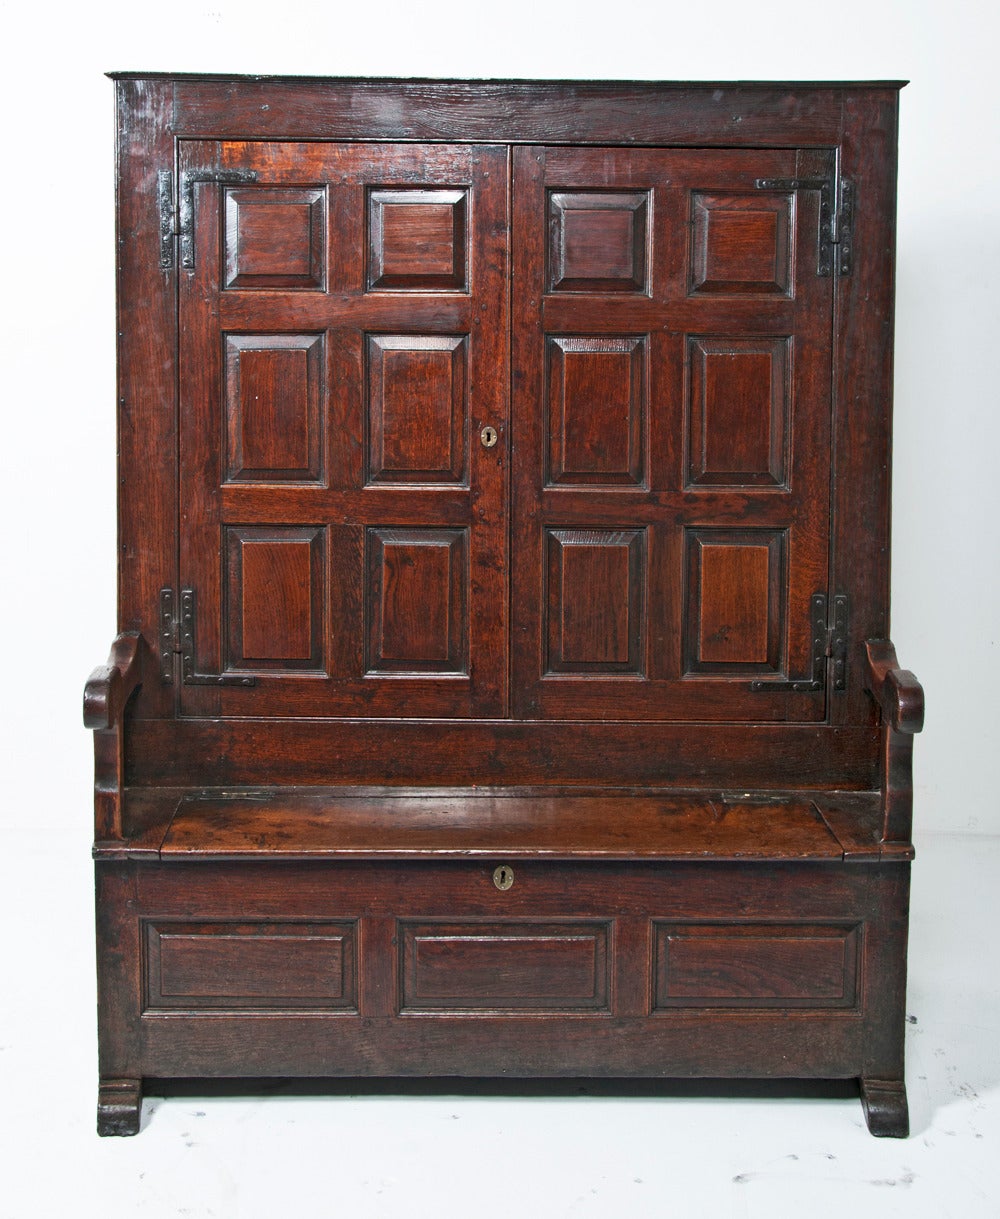 English early 18th century oak bacon settle, circa 1720 of superb color and condition. The field panelled doors open to reveal original iron hooks and three later shelves. The back has ventilation holes. Typically the doors are on the back side.